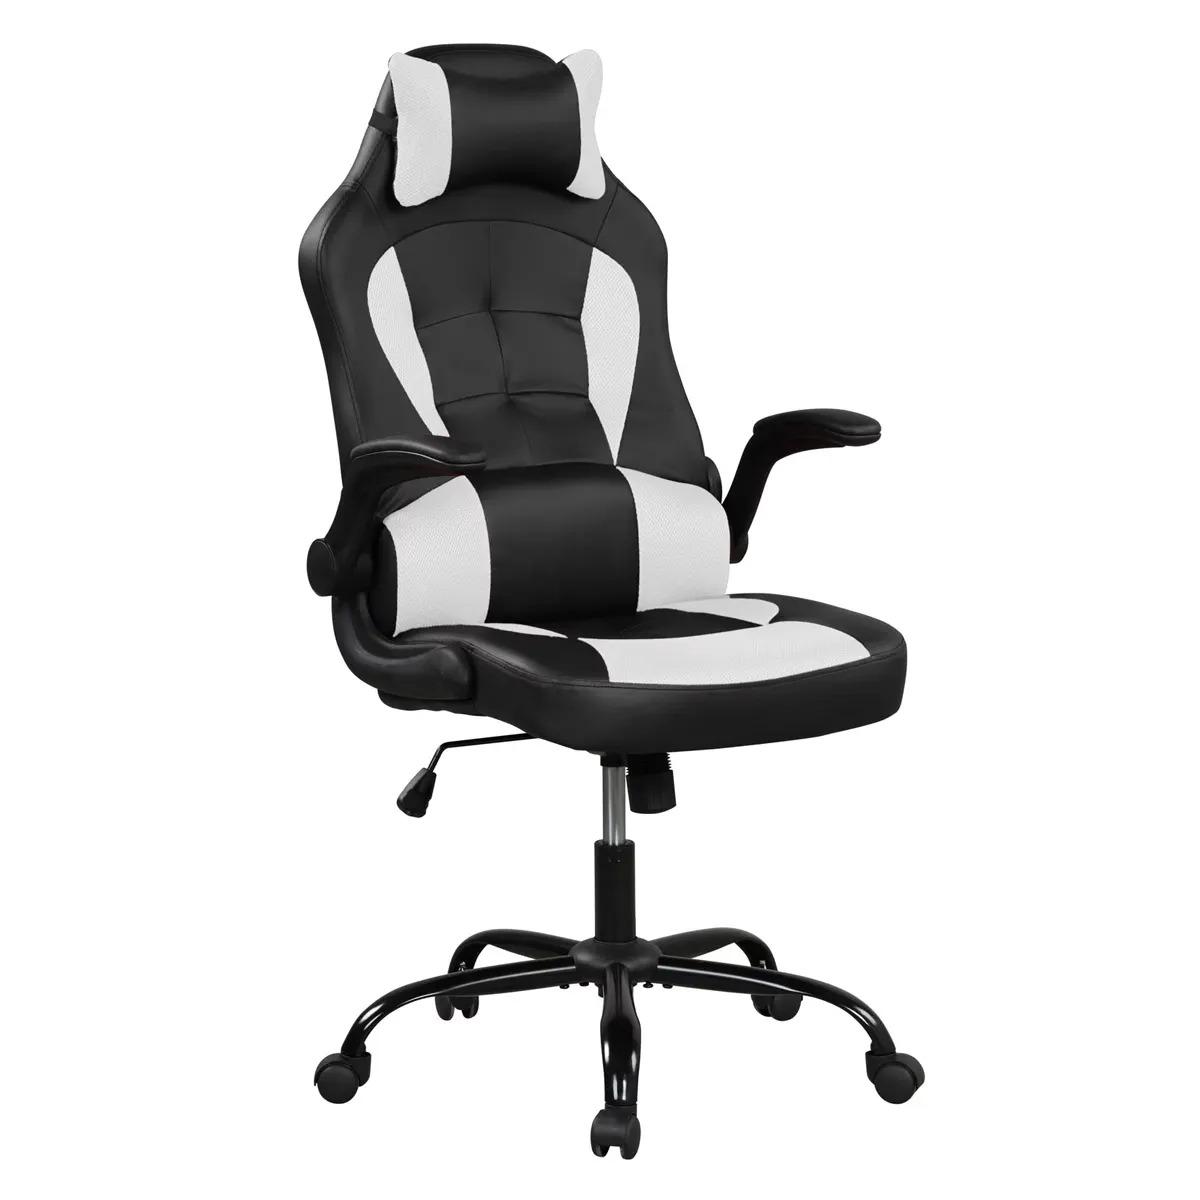 Lifestyle Solutions Viceroy High Back Swivel Gaming Chair for $68 Shipped